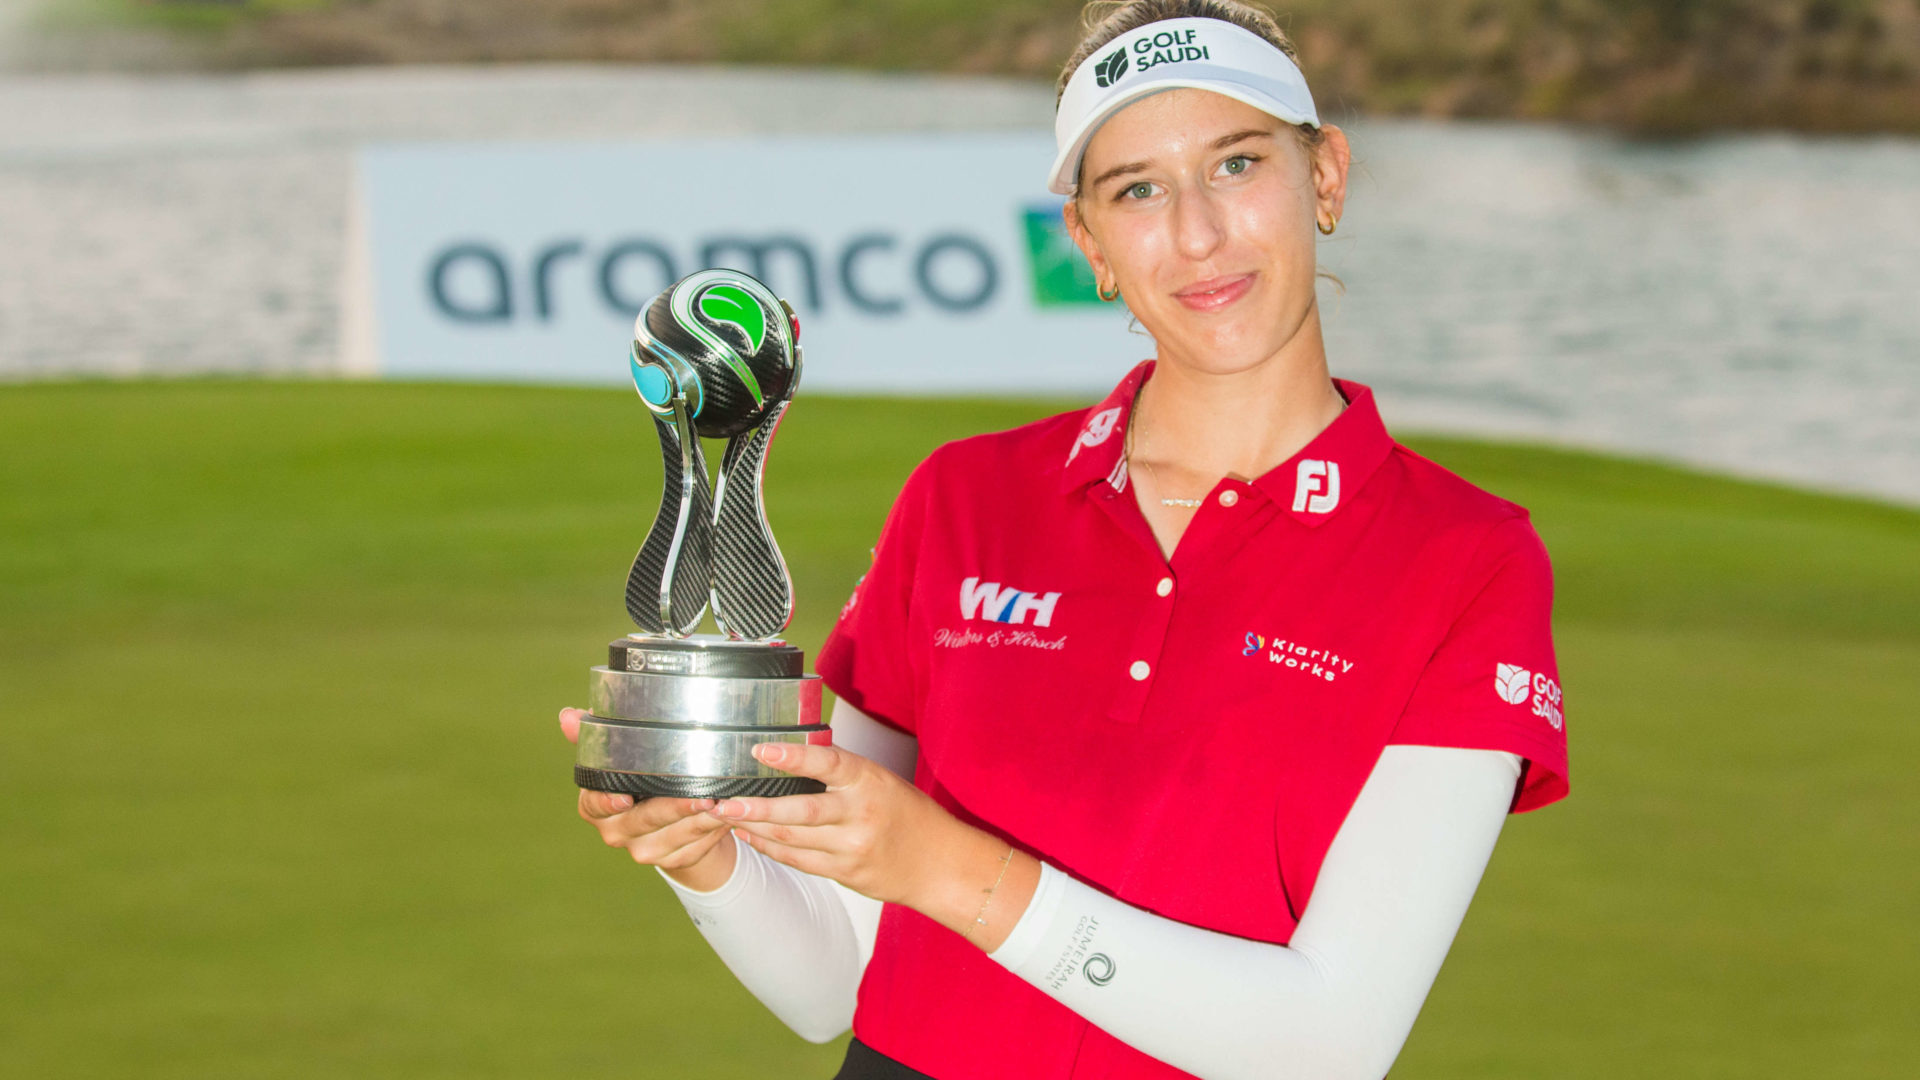 12/11/2022. Ladies European Tour 2022. Aramco Team Series presented by Public Investment Fund, Jeddah, Royal Greens Golf and Country Club, King Abdullah Economic City, Jeddah, Saudi Arabia. November 10-12 2022. Chiara Noja of Germany with her trophy.tour. news Credit: Tristan Jones / LET